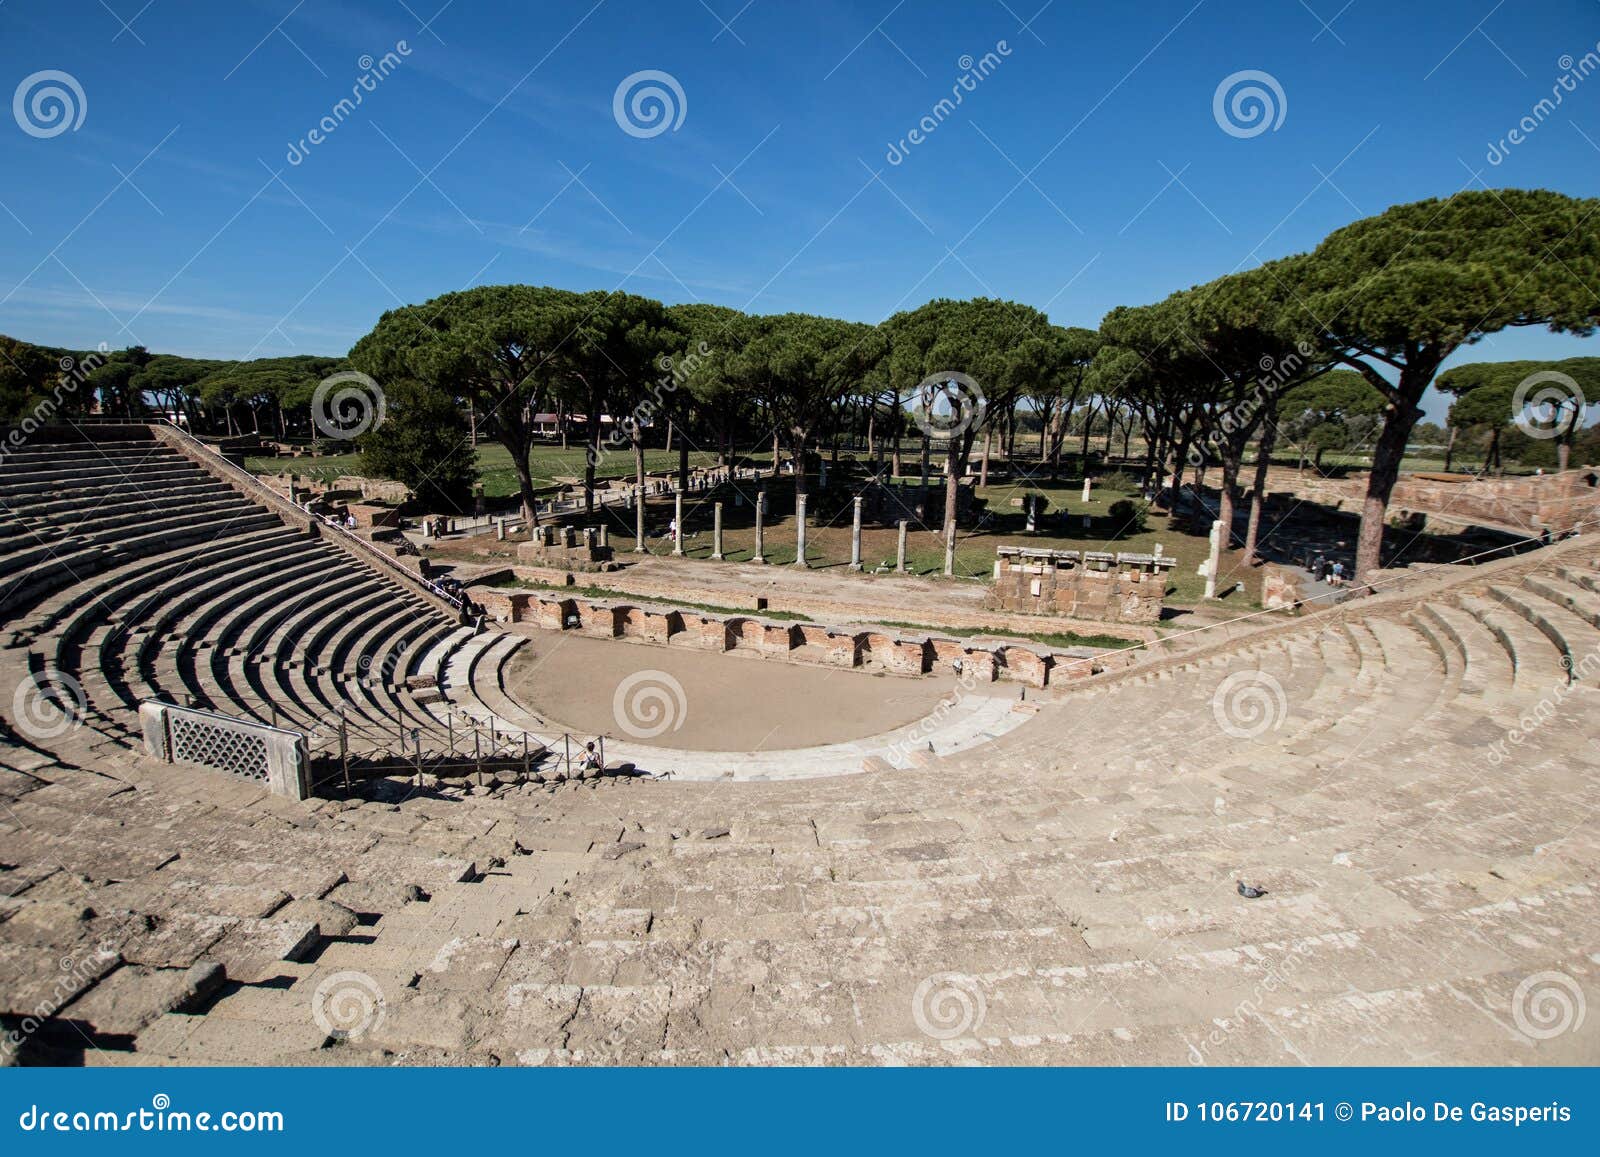 almost complete roman theater in ostia antica. drama place in an